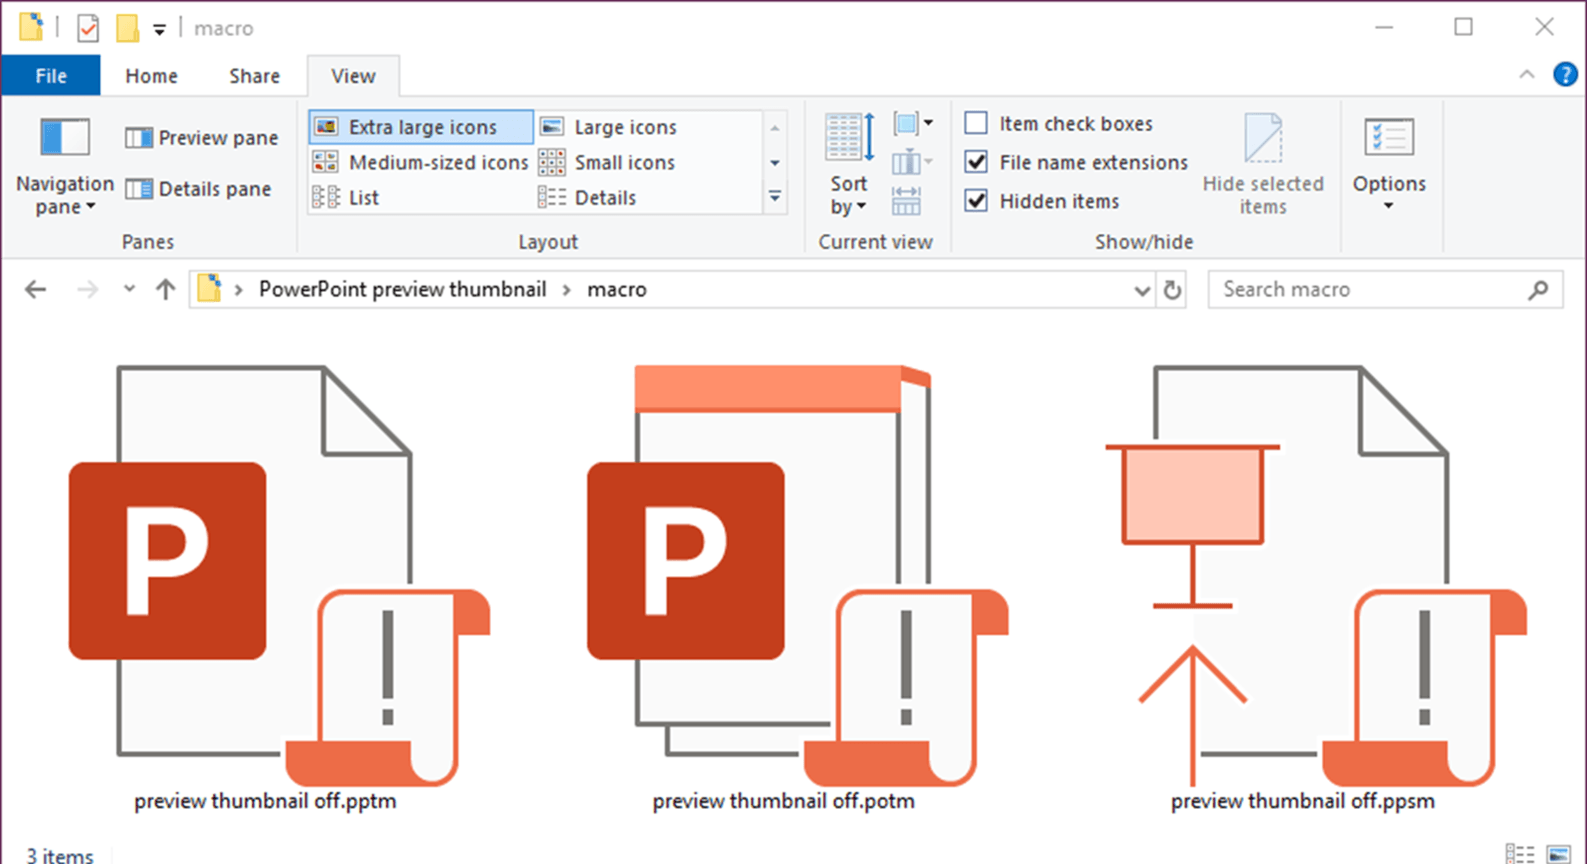 powerpoint icons